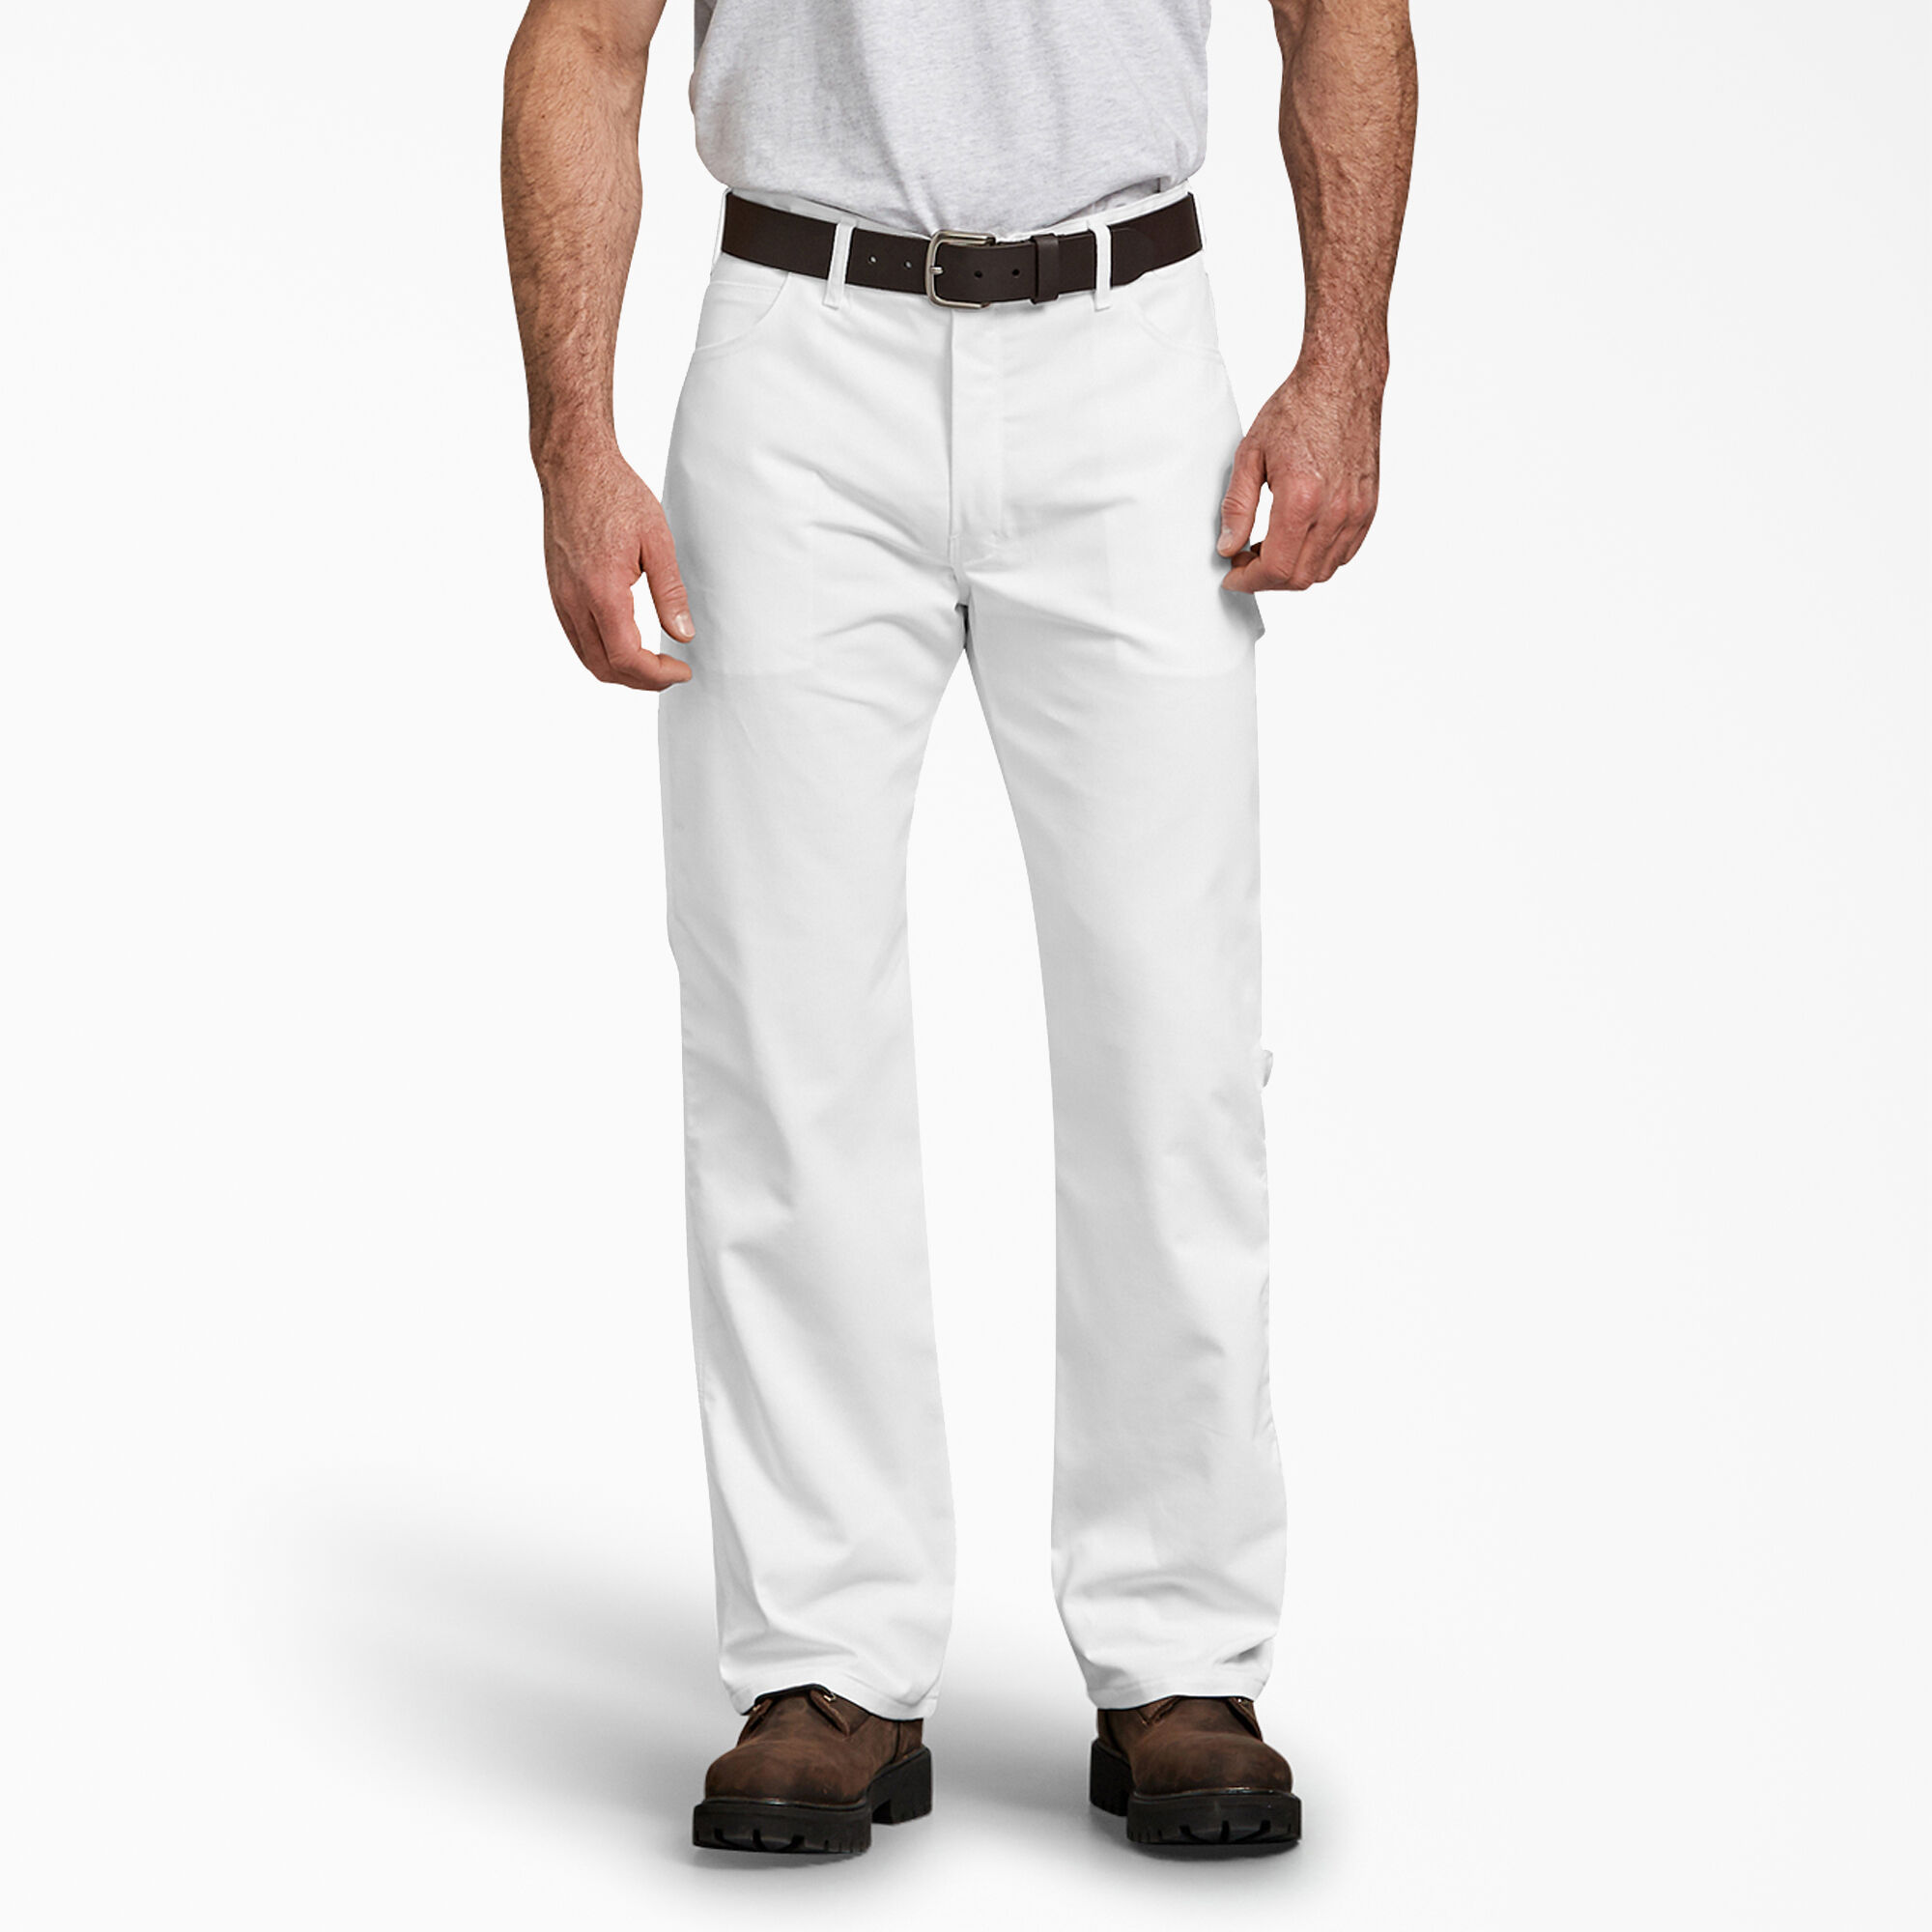 FLEX Relaxed Fit Painter's Pants, White